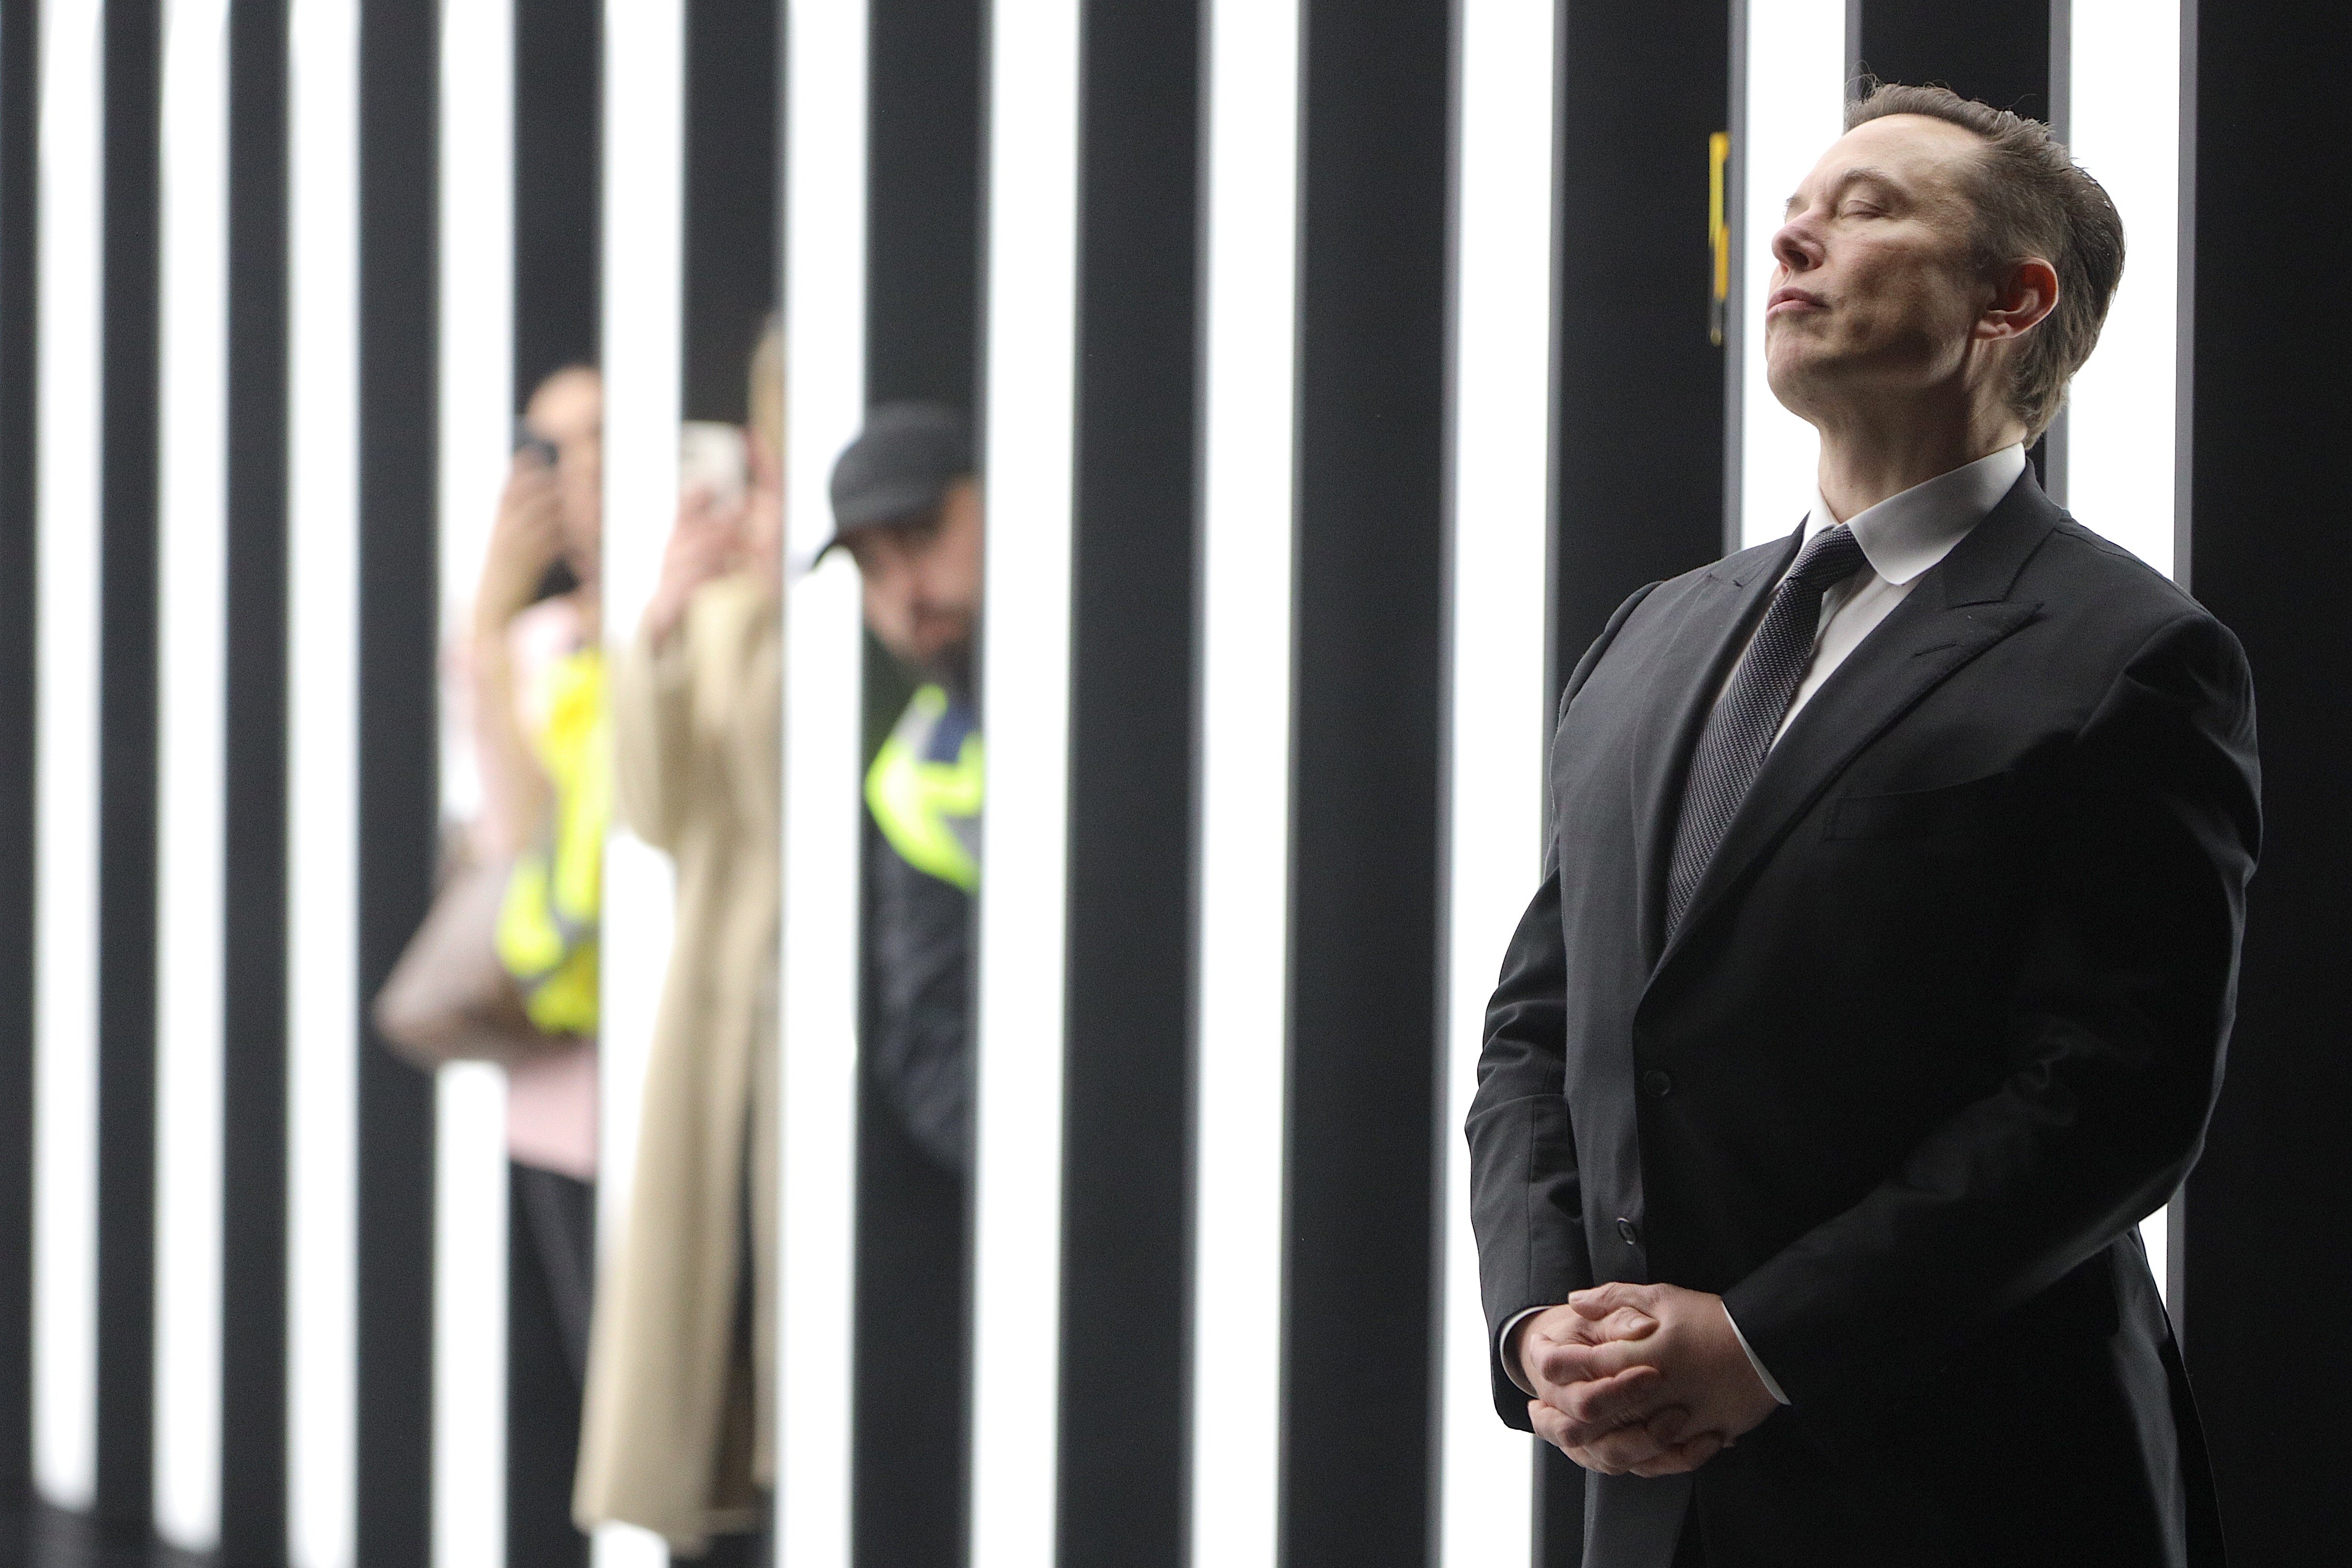 Elon Musk stands in front of tunnel of bright light at the new Tesla manufacturing plant in Germany, while workers peek at him from behind.